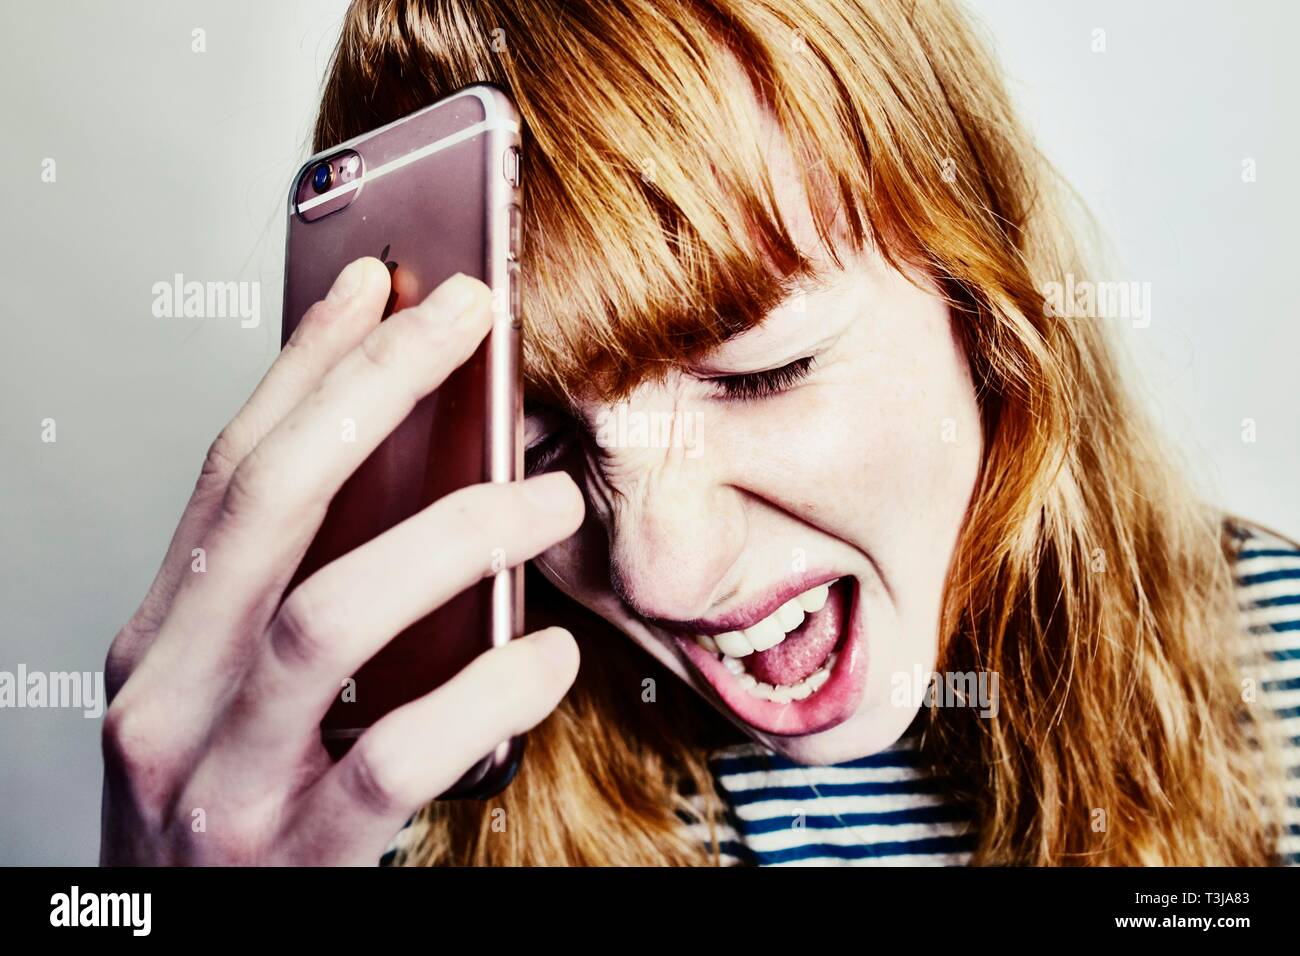 Girl, teenager, red-haired, holding her head in despair screaming smartphone, studio shot, Germany Stock Photo